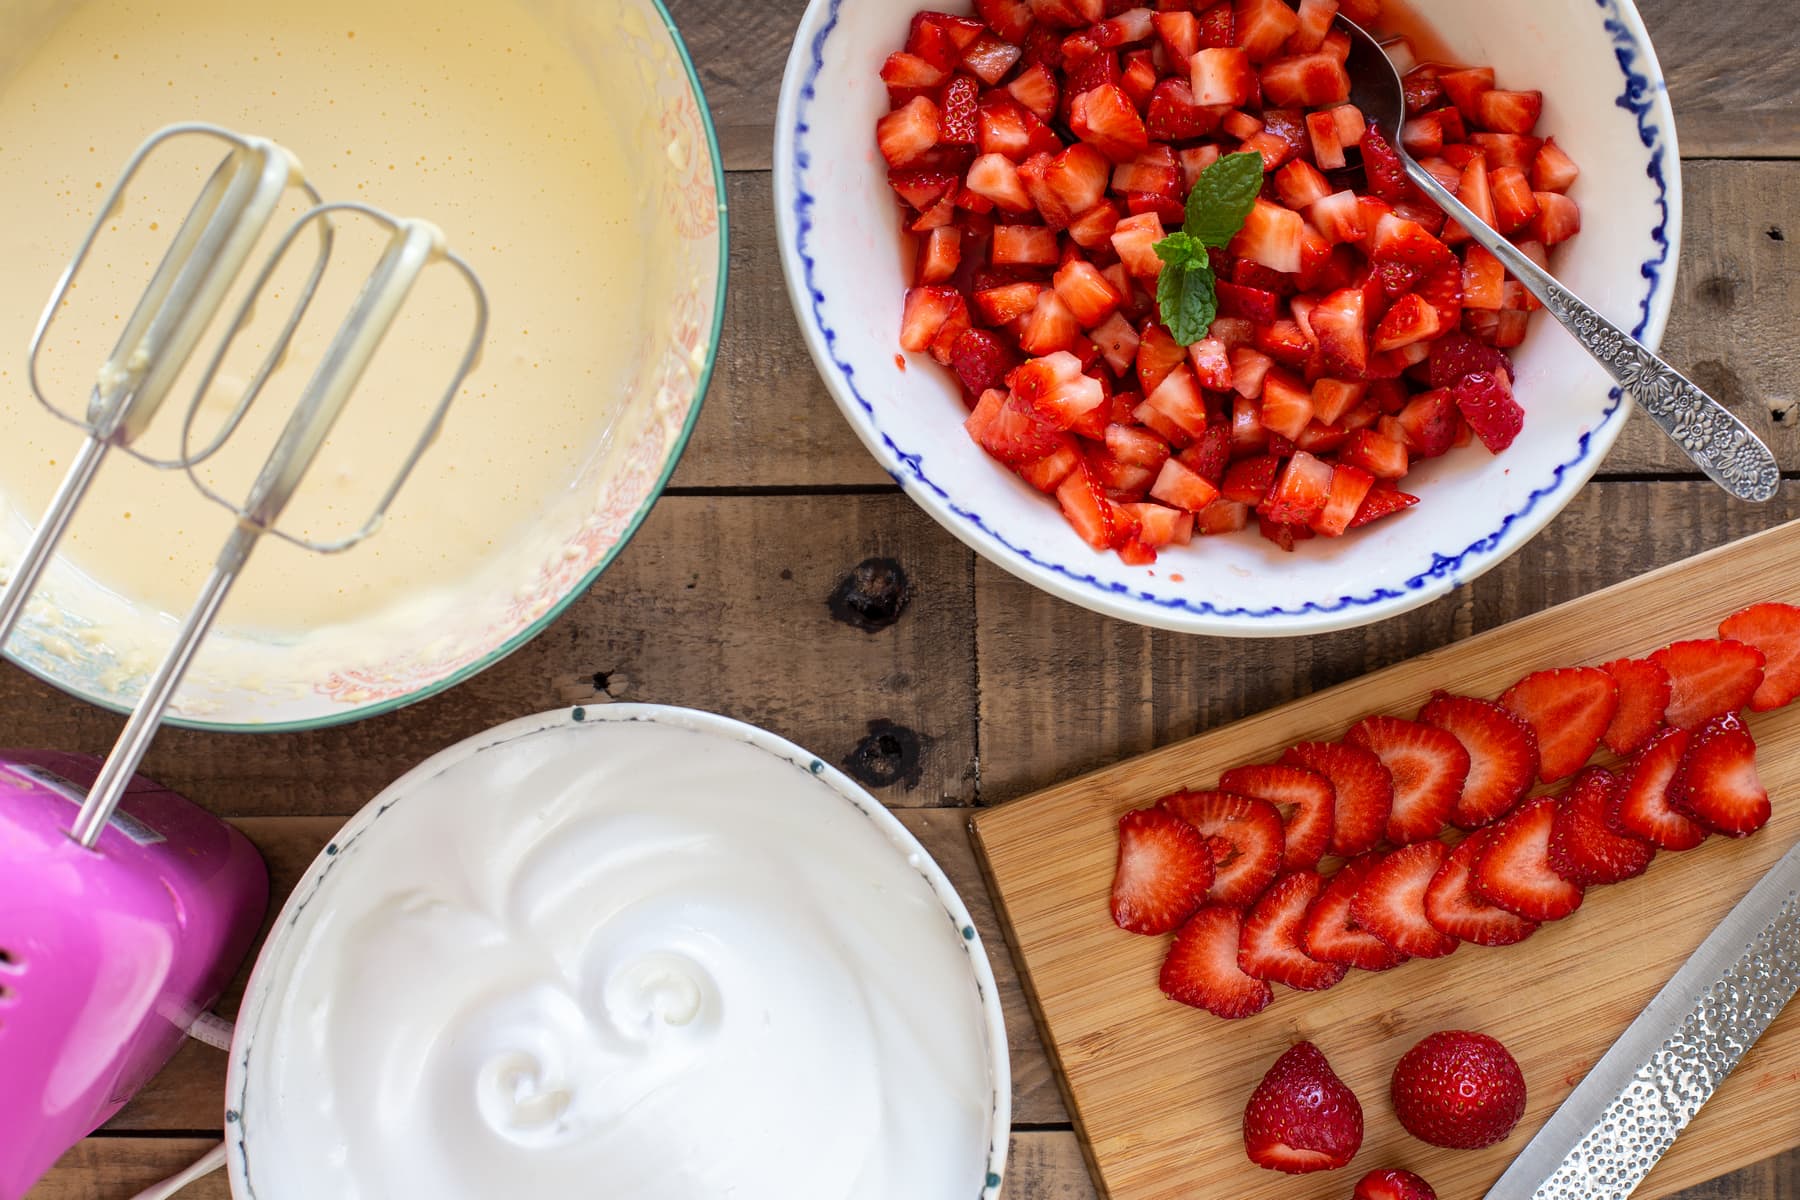 One bowl with whipped egg whites, one with whipped yolks and mascarpone, and a bowl with diced strawberries.